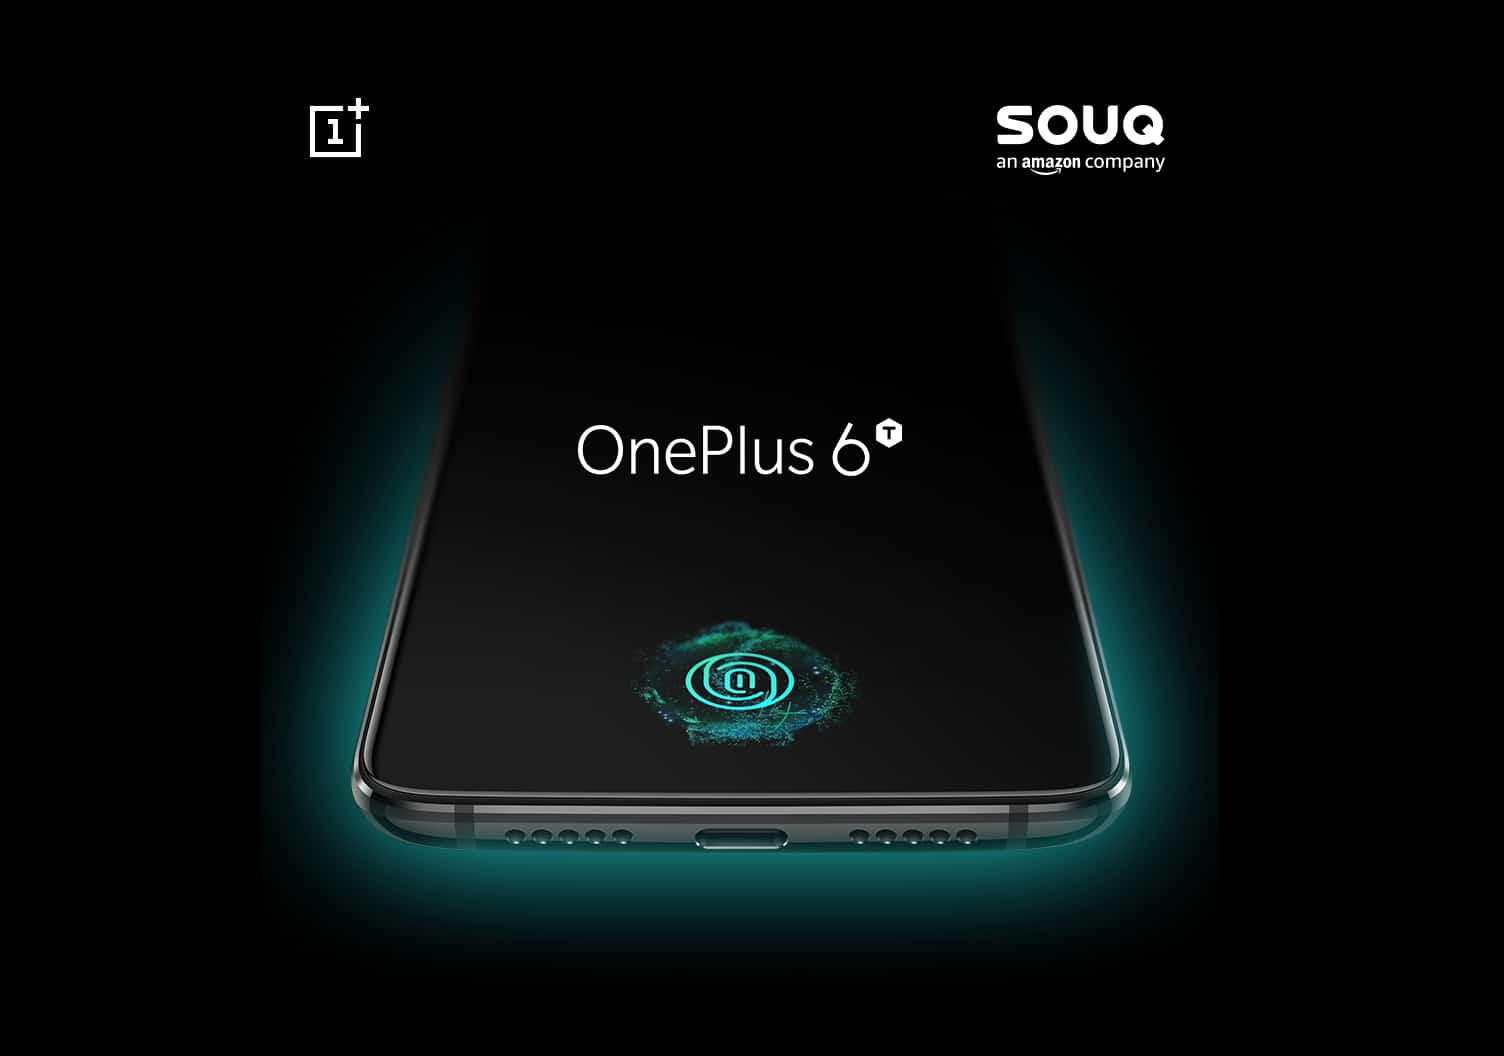 OnePlus 6T to launch exclusively on SOUQ.com